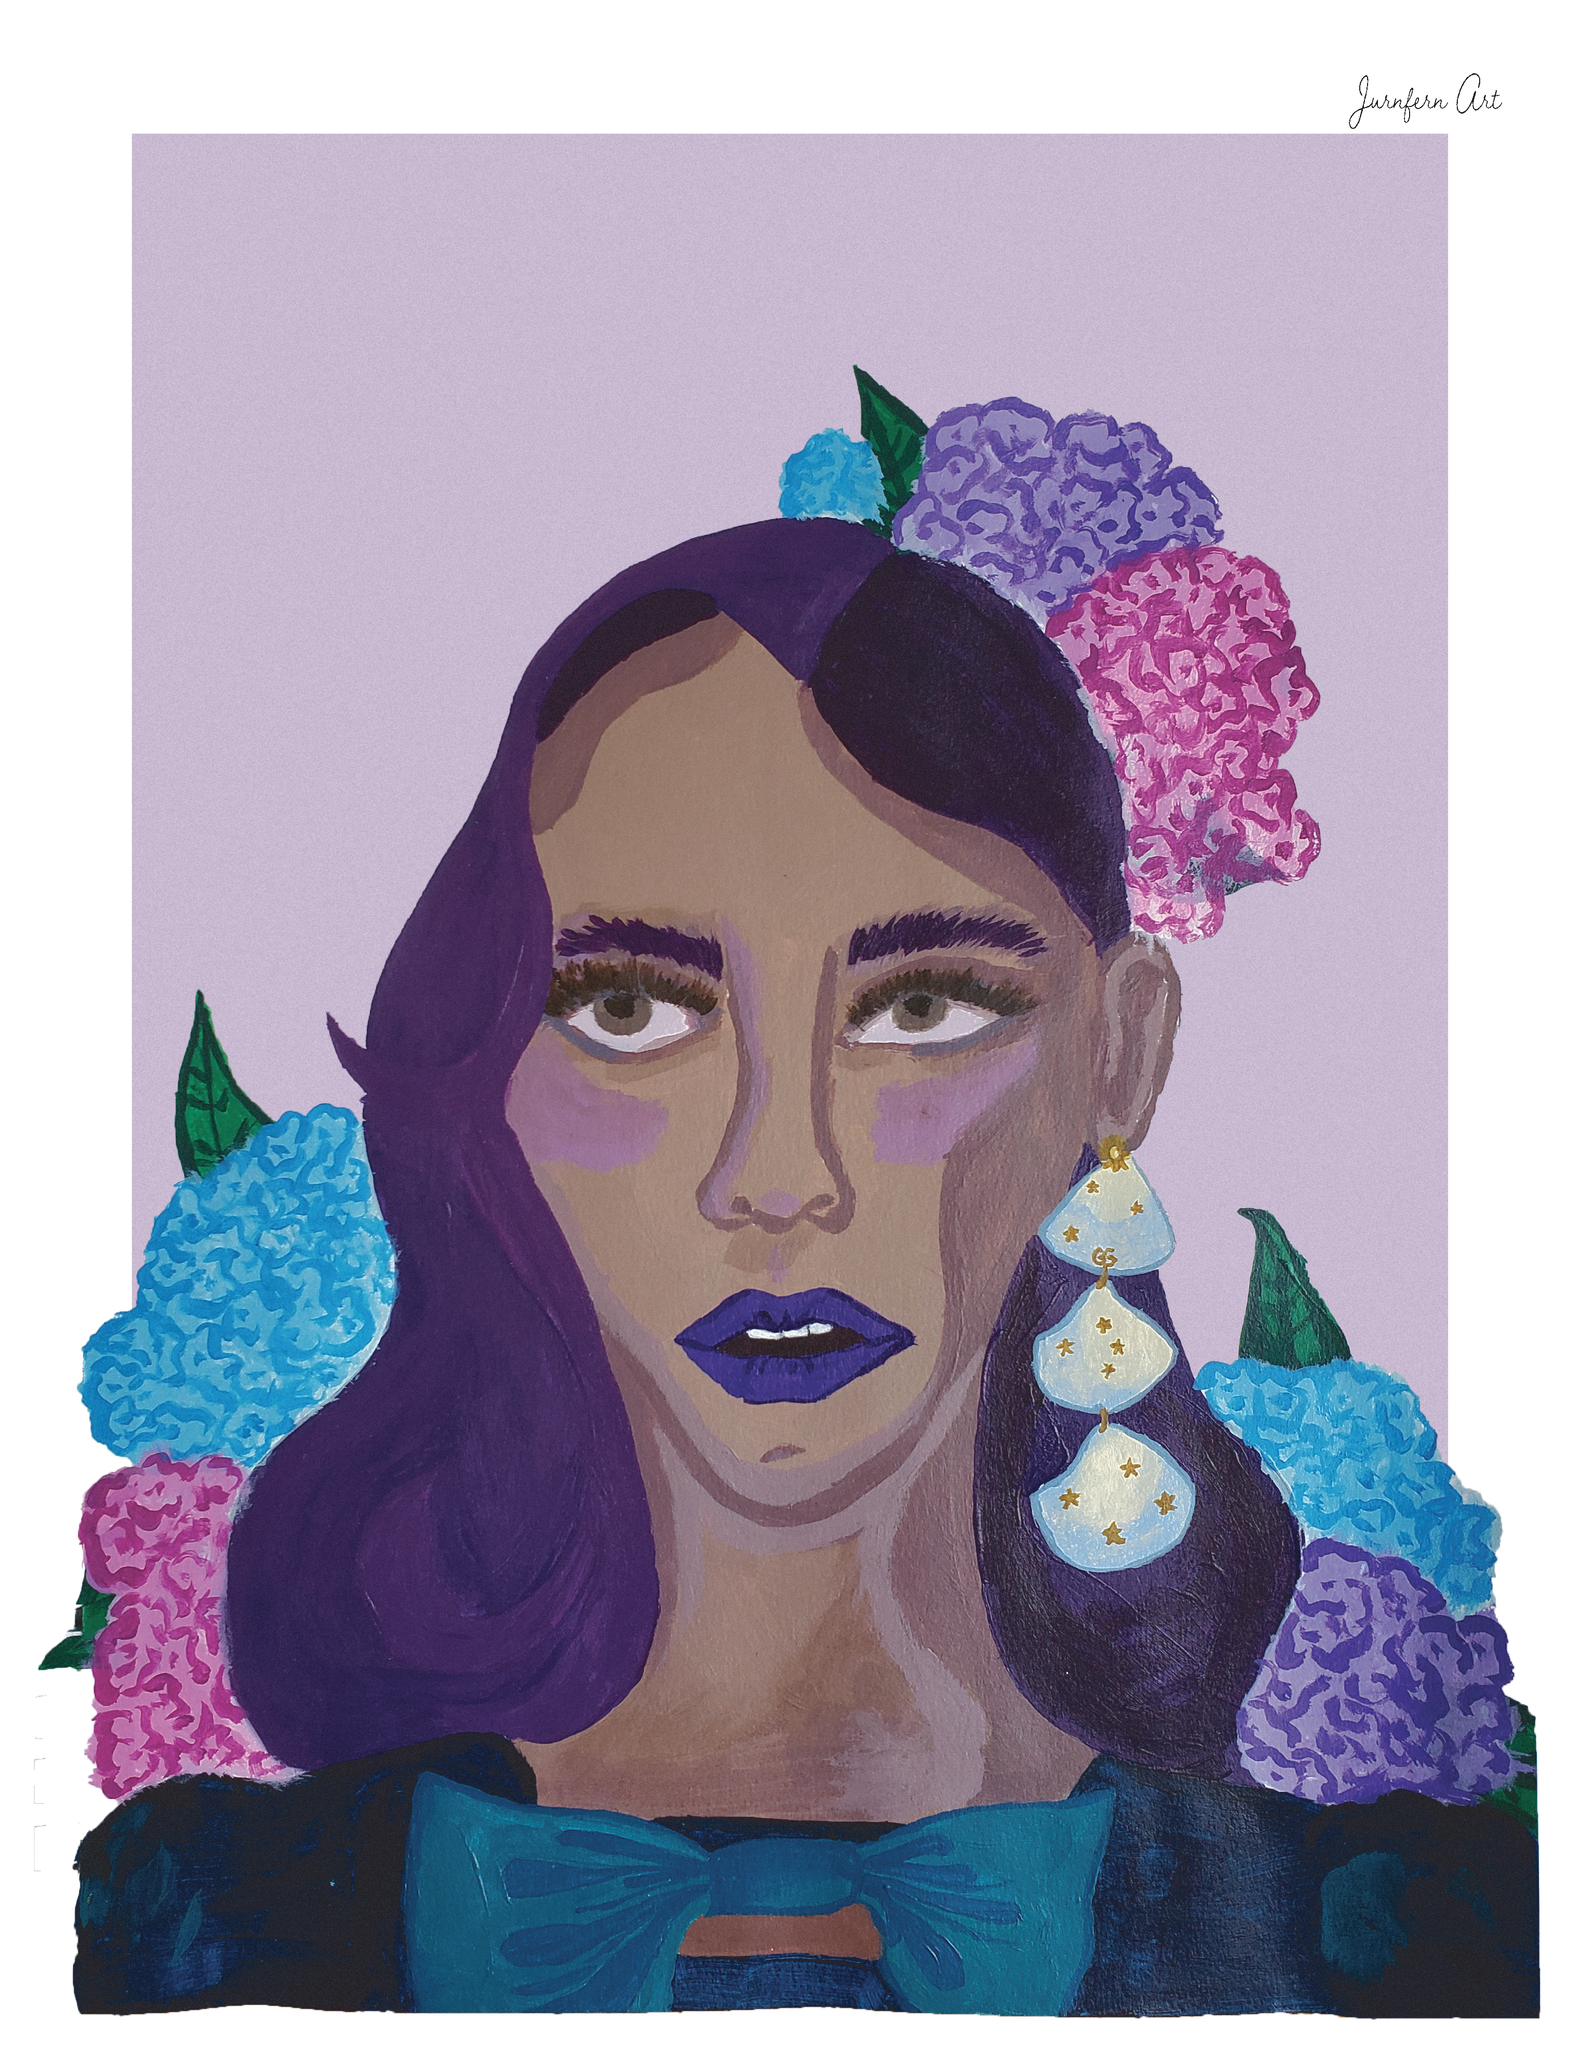 An illustration of a Black woman painted in purple hues and wearing a blue dress with a blow in front and hydrangea flowers in her hair